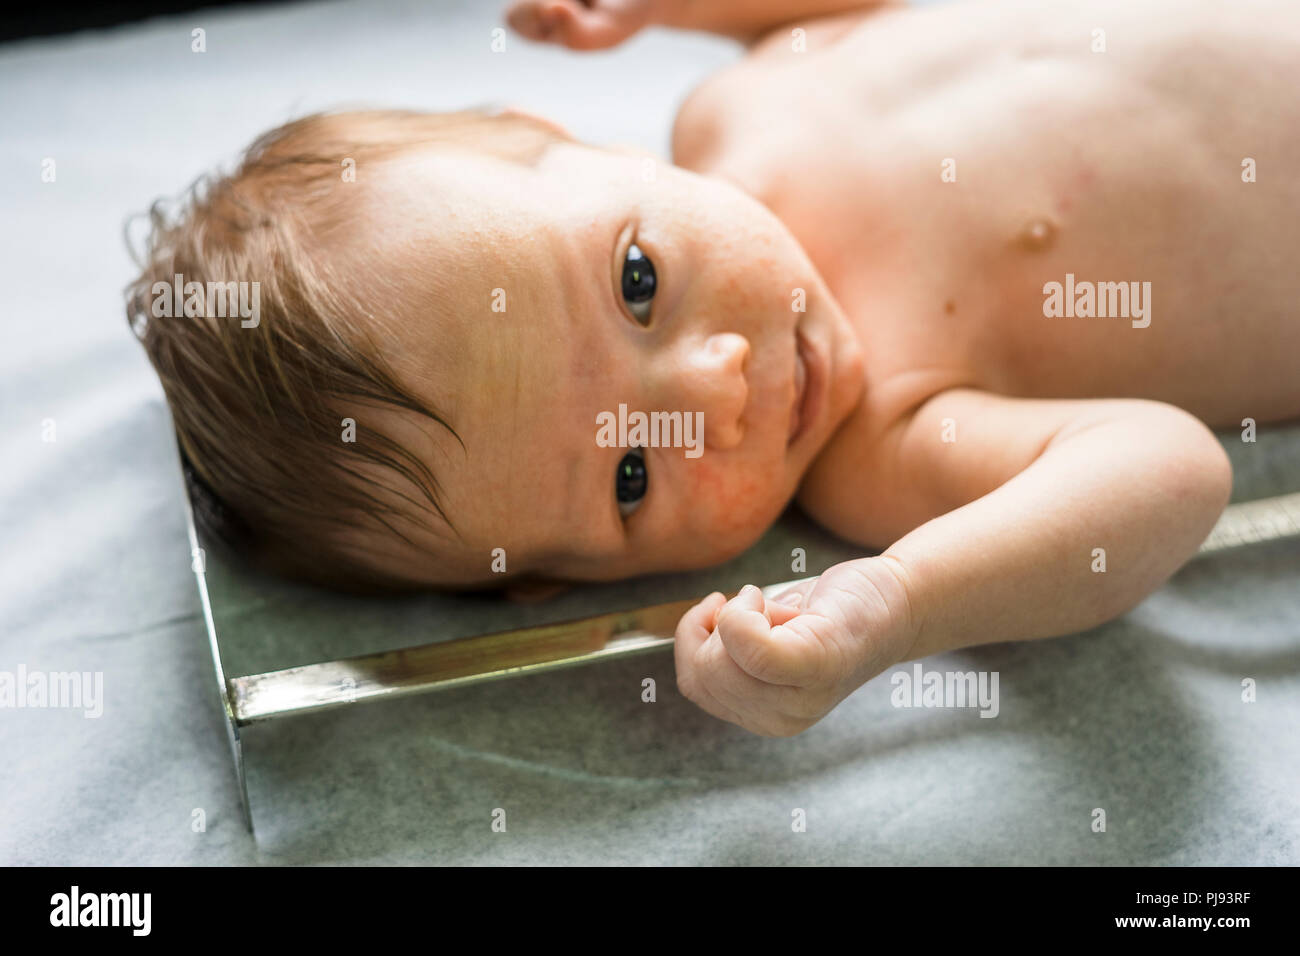 Newborn baby boy with many pimples whose growth is measured Stock Photo